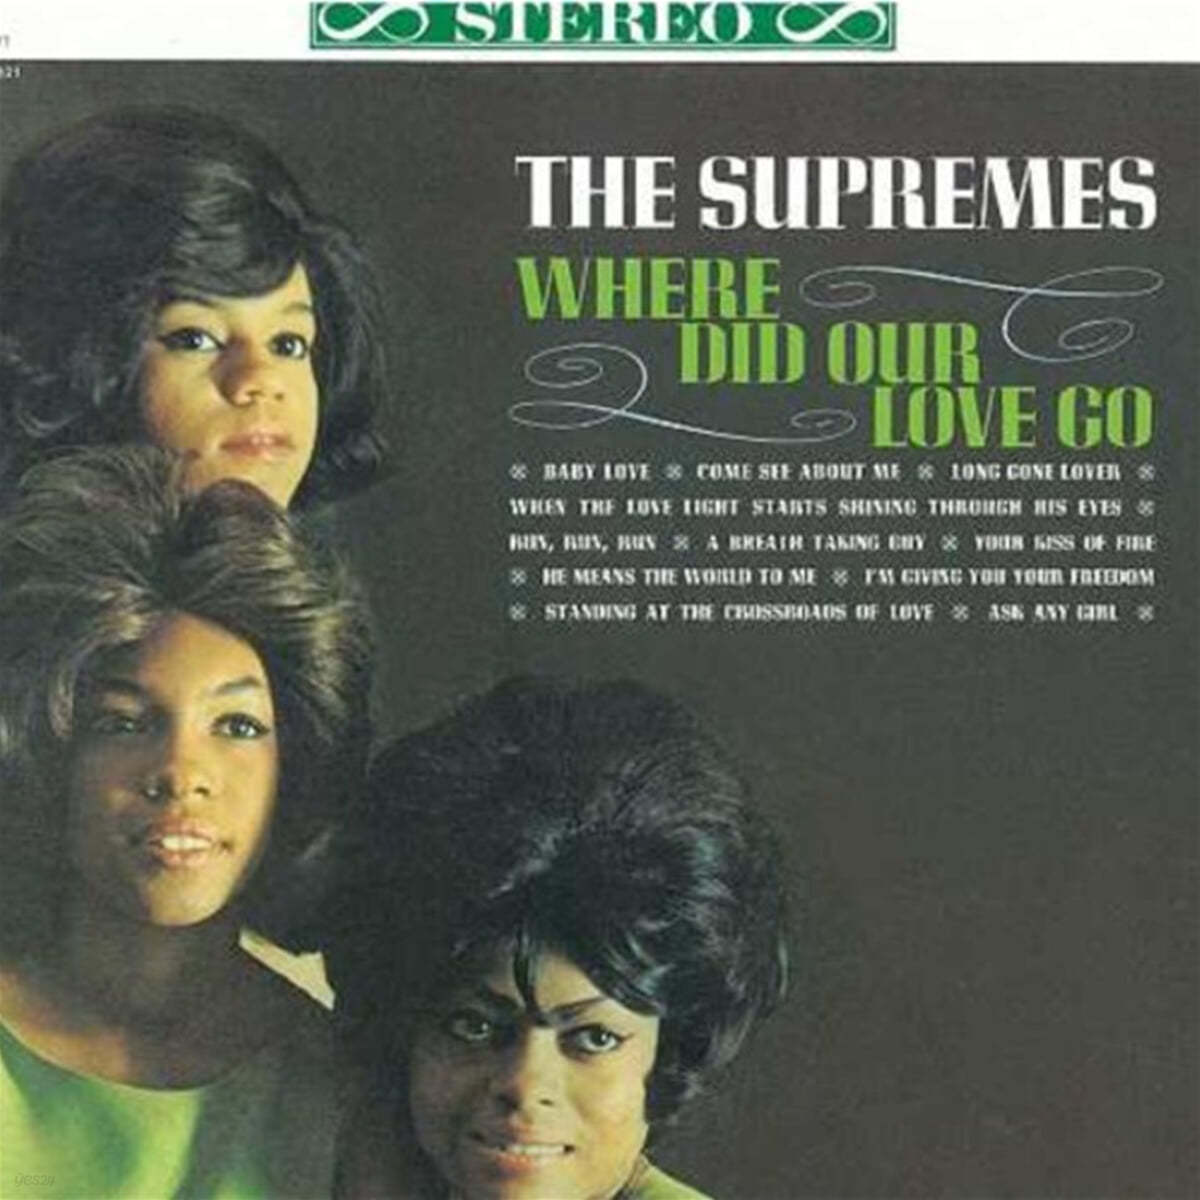 Diana Ross / The Supremes (다이아나 로스 / 더 슈프림스) - Where Did Our Love Go 